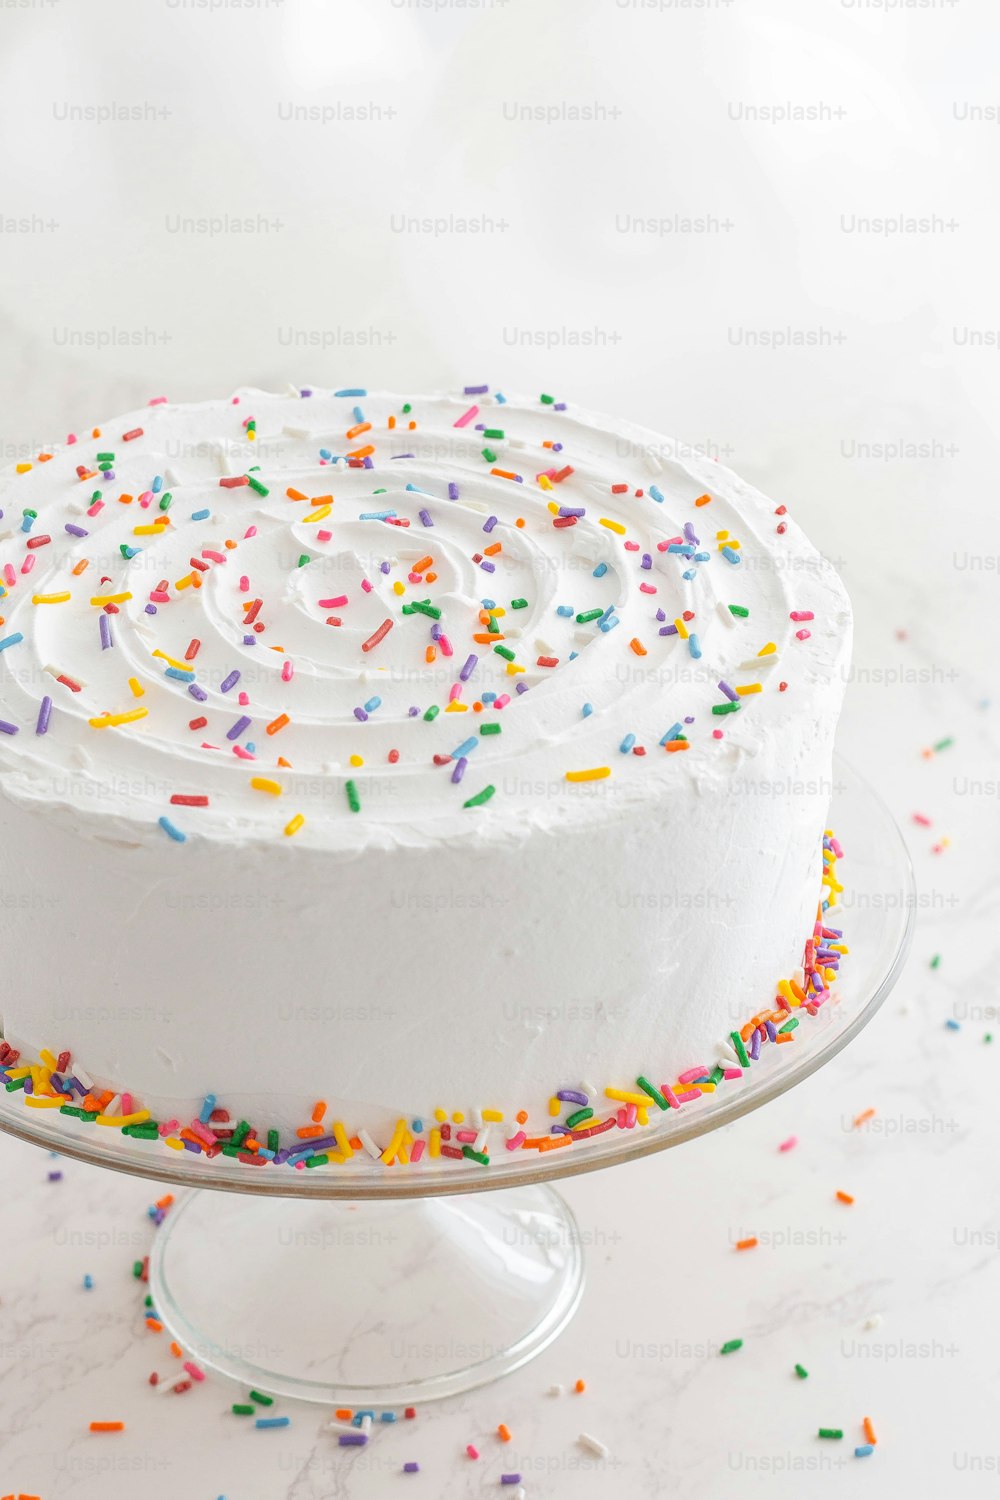 a cake with white frosting and sprinkles